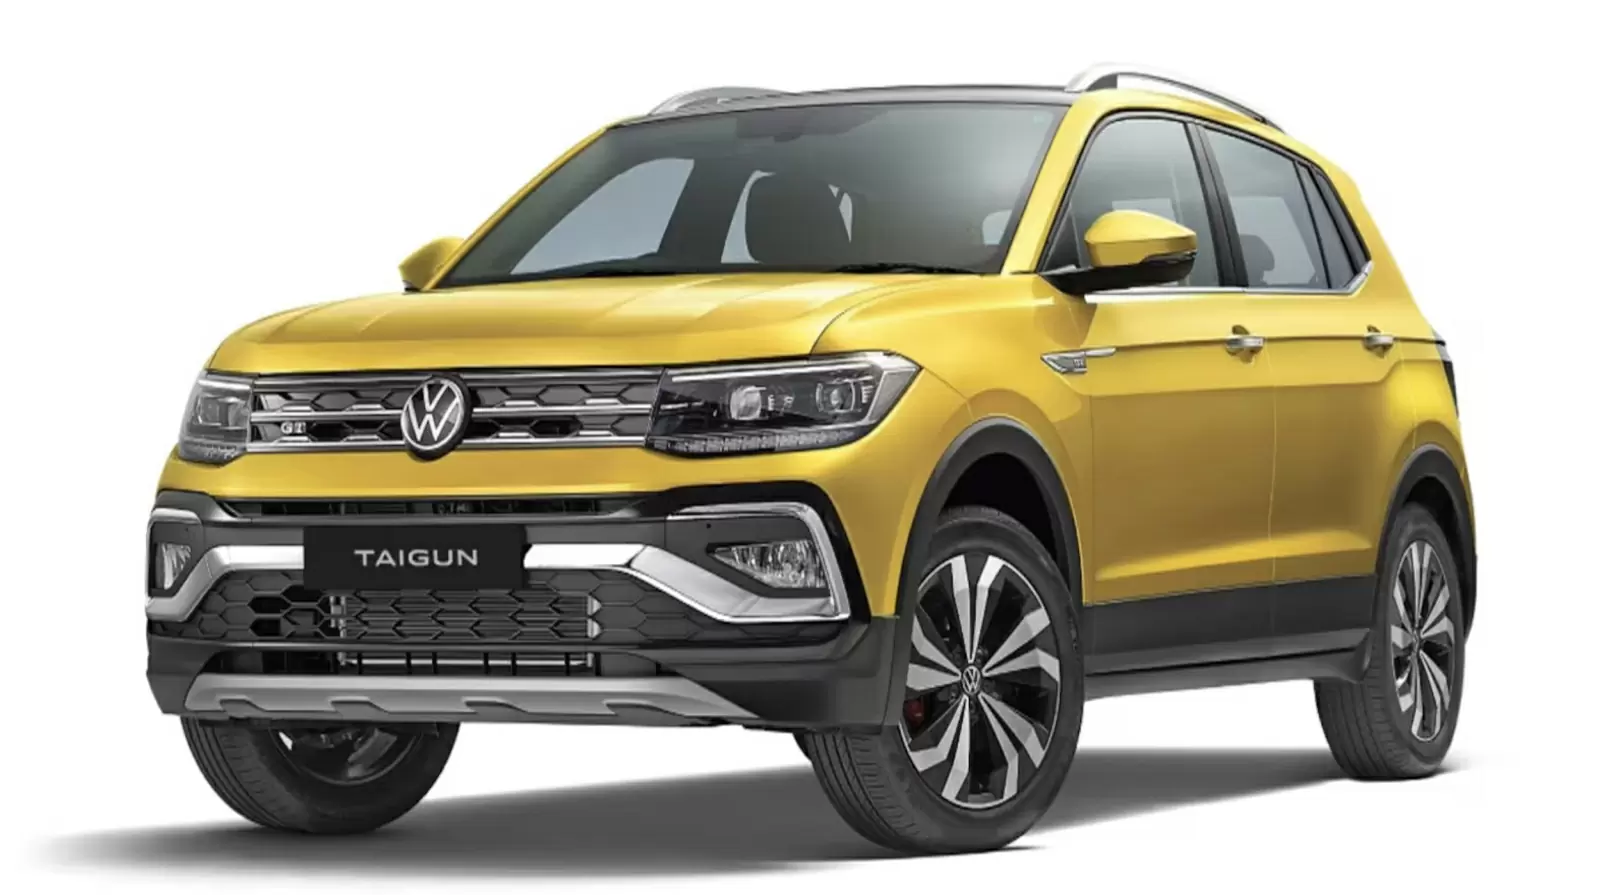 Volkswagen Taigun is getting a discount of more than Rs 1 lakh, the country's safest SUV has become very affordable